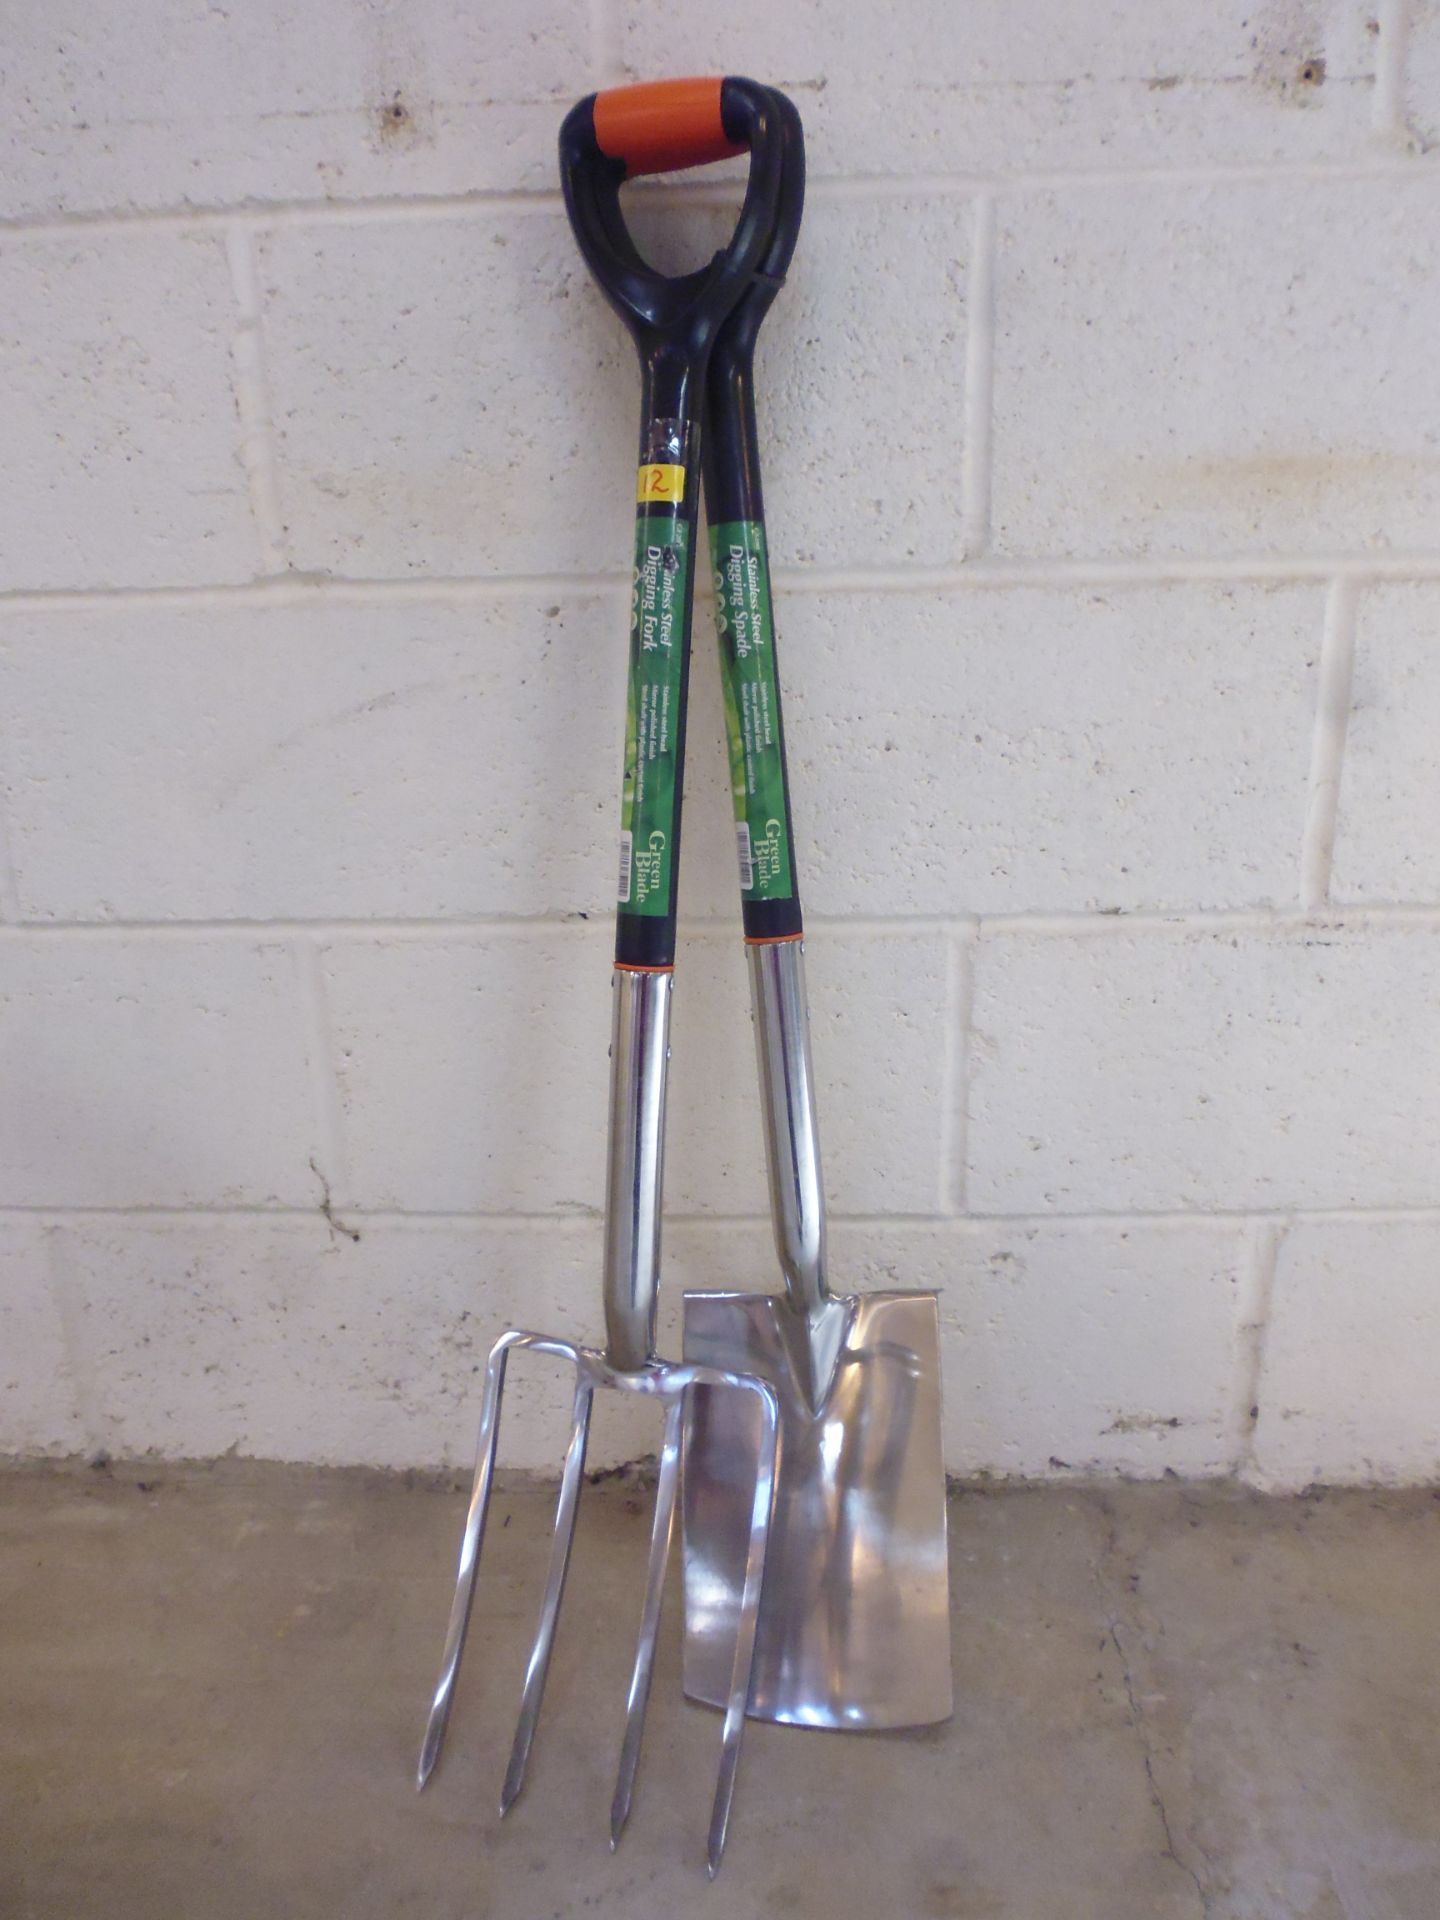 Stainless digging fork and spade.